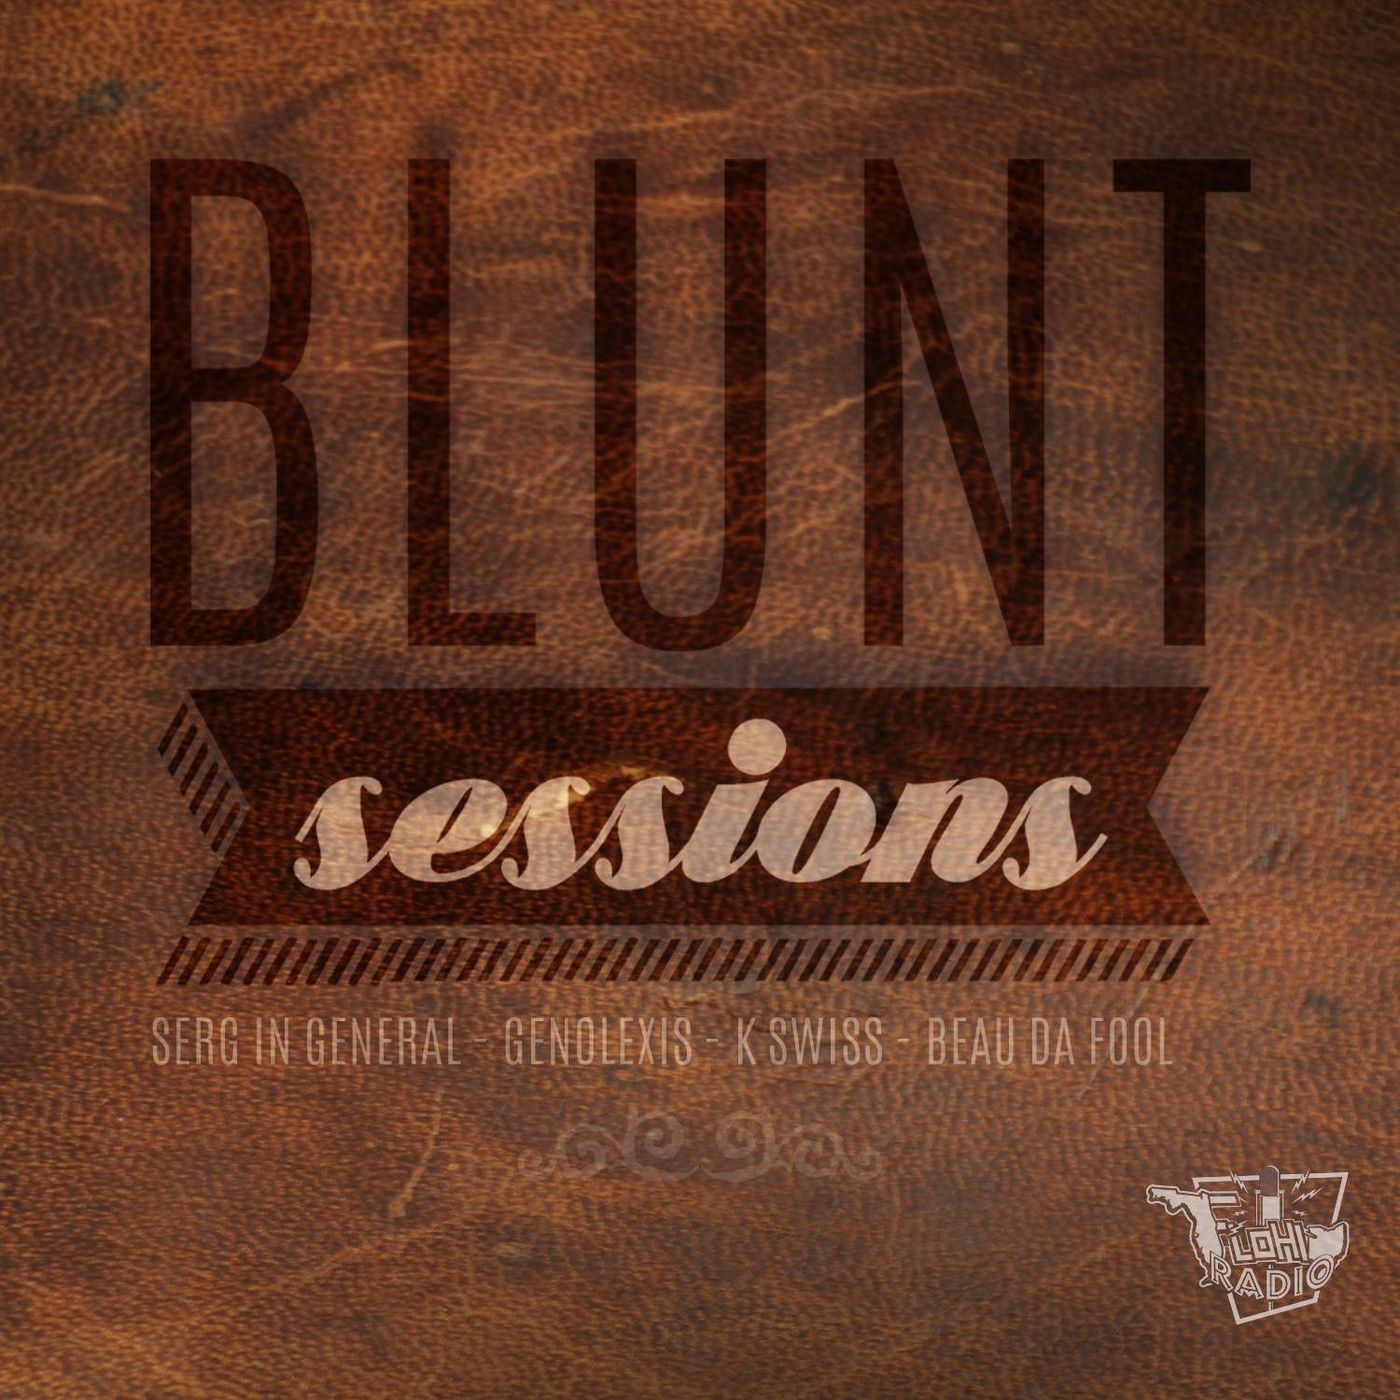 Blunt Sessions